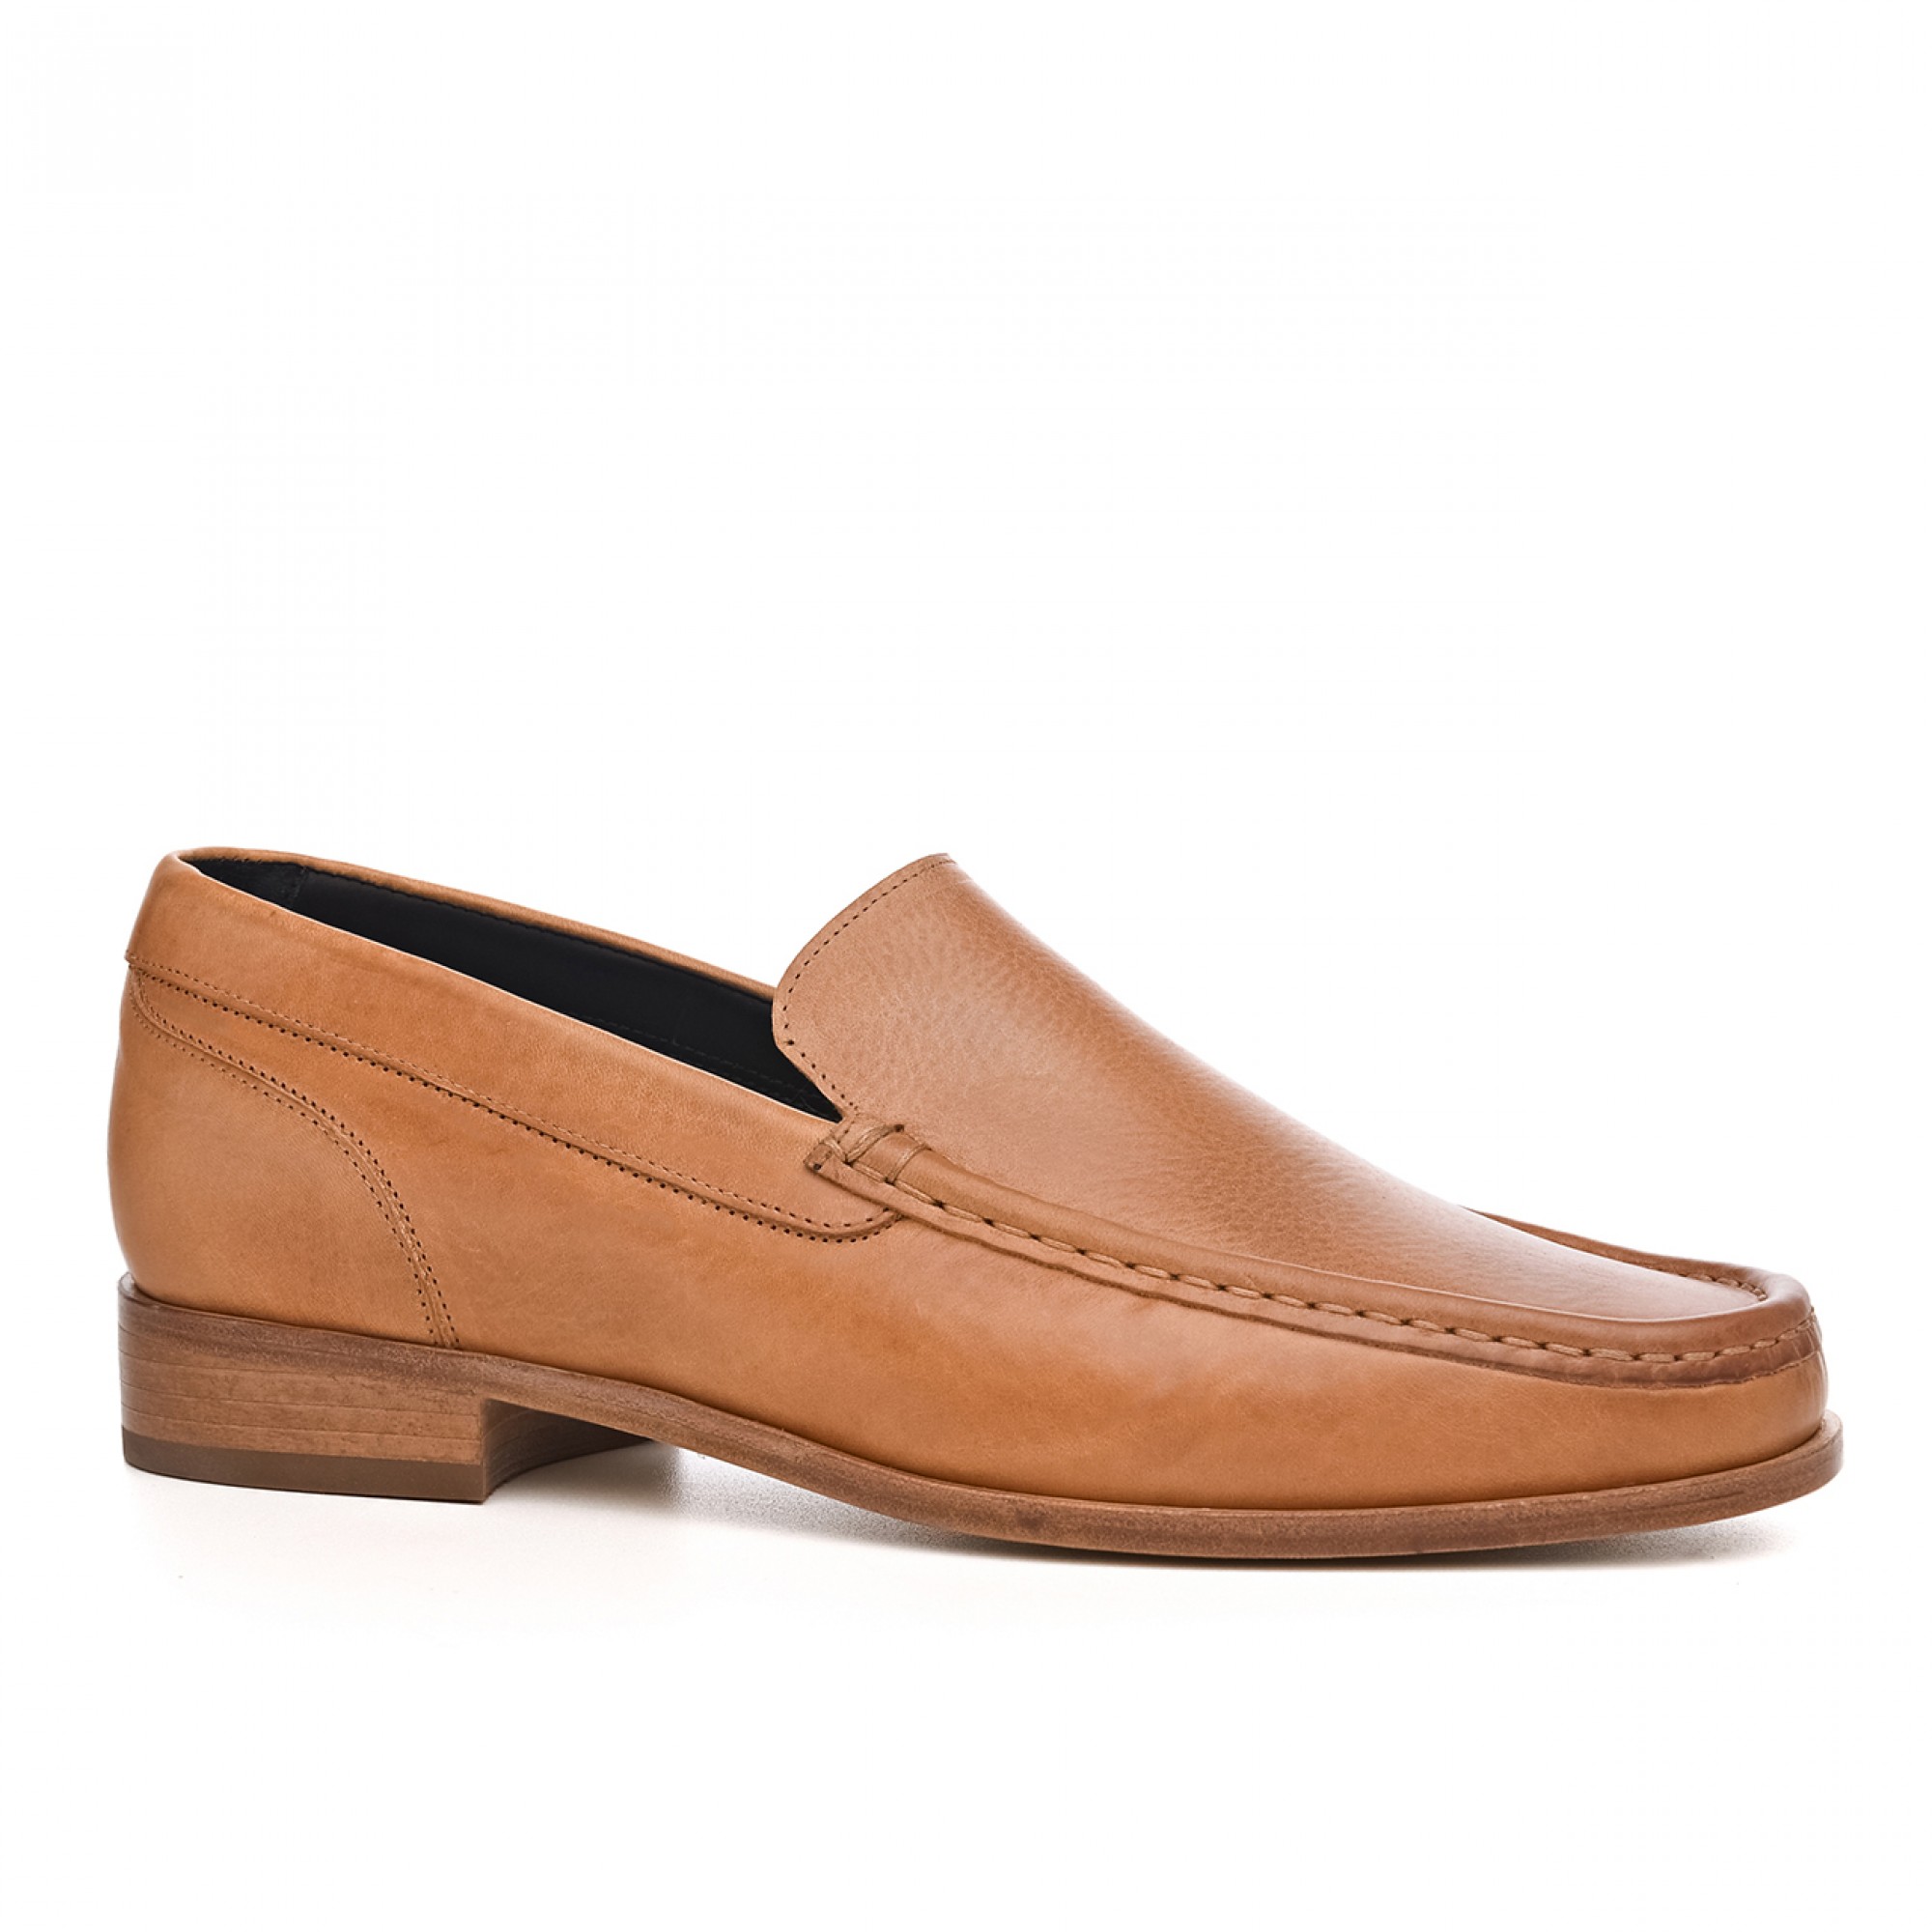 Damasco - Elevator Loafers in Vegetable Leather up to 2.6 inches